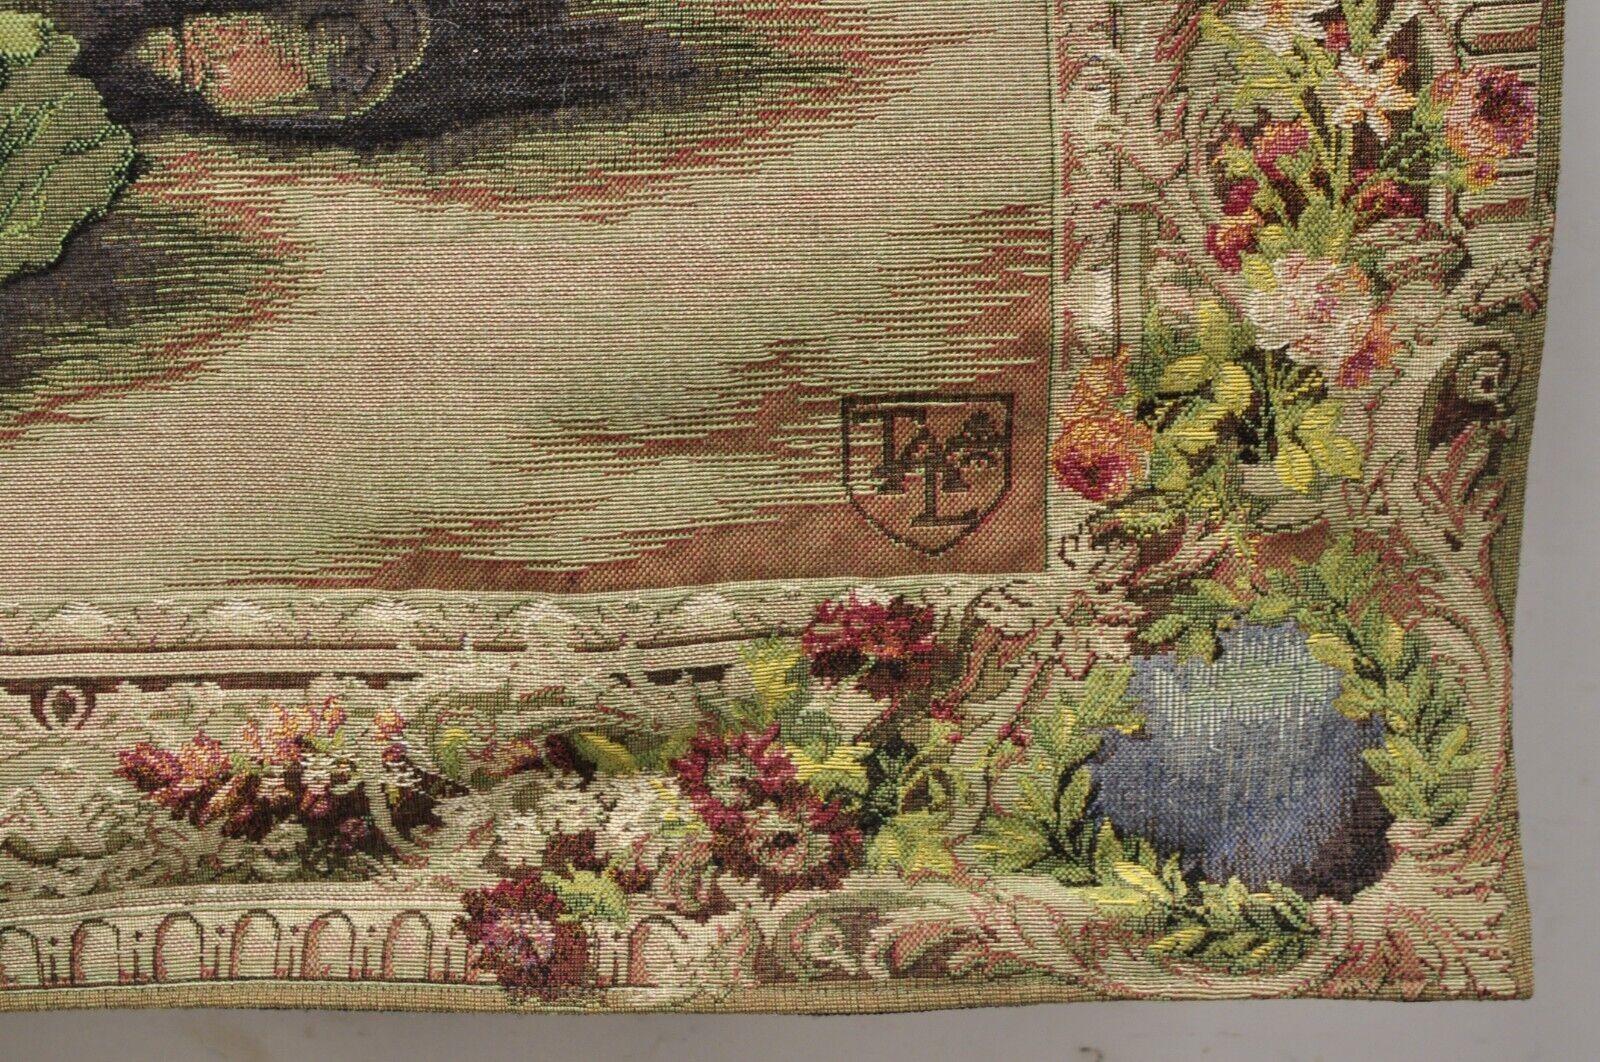 Jacquard Woven French Wall Tapestry Still Life Flowers & Mandolin by J&D For Sale 2